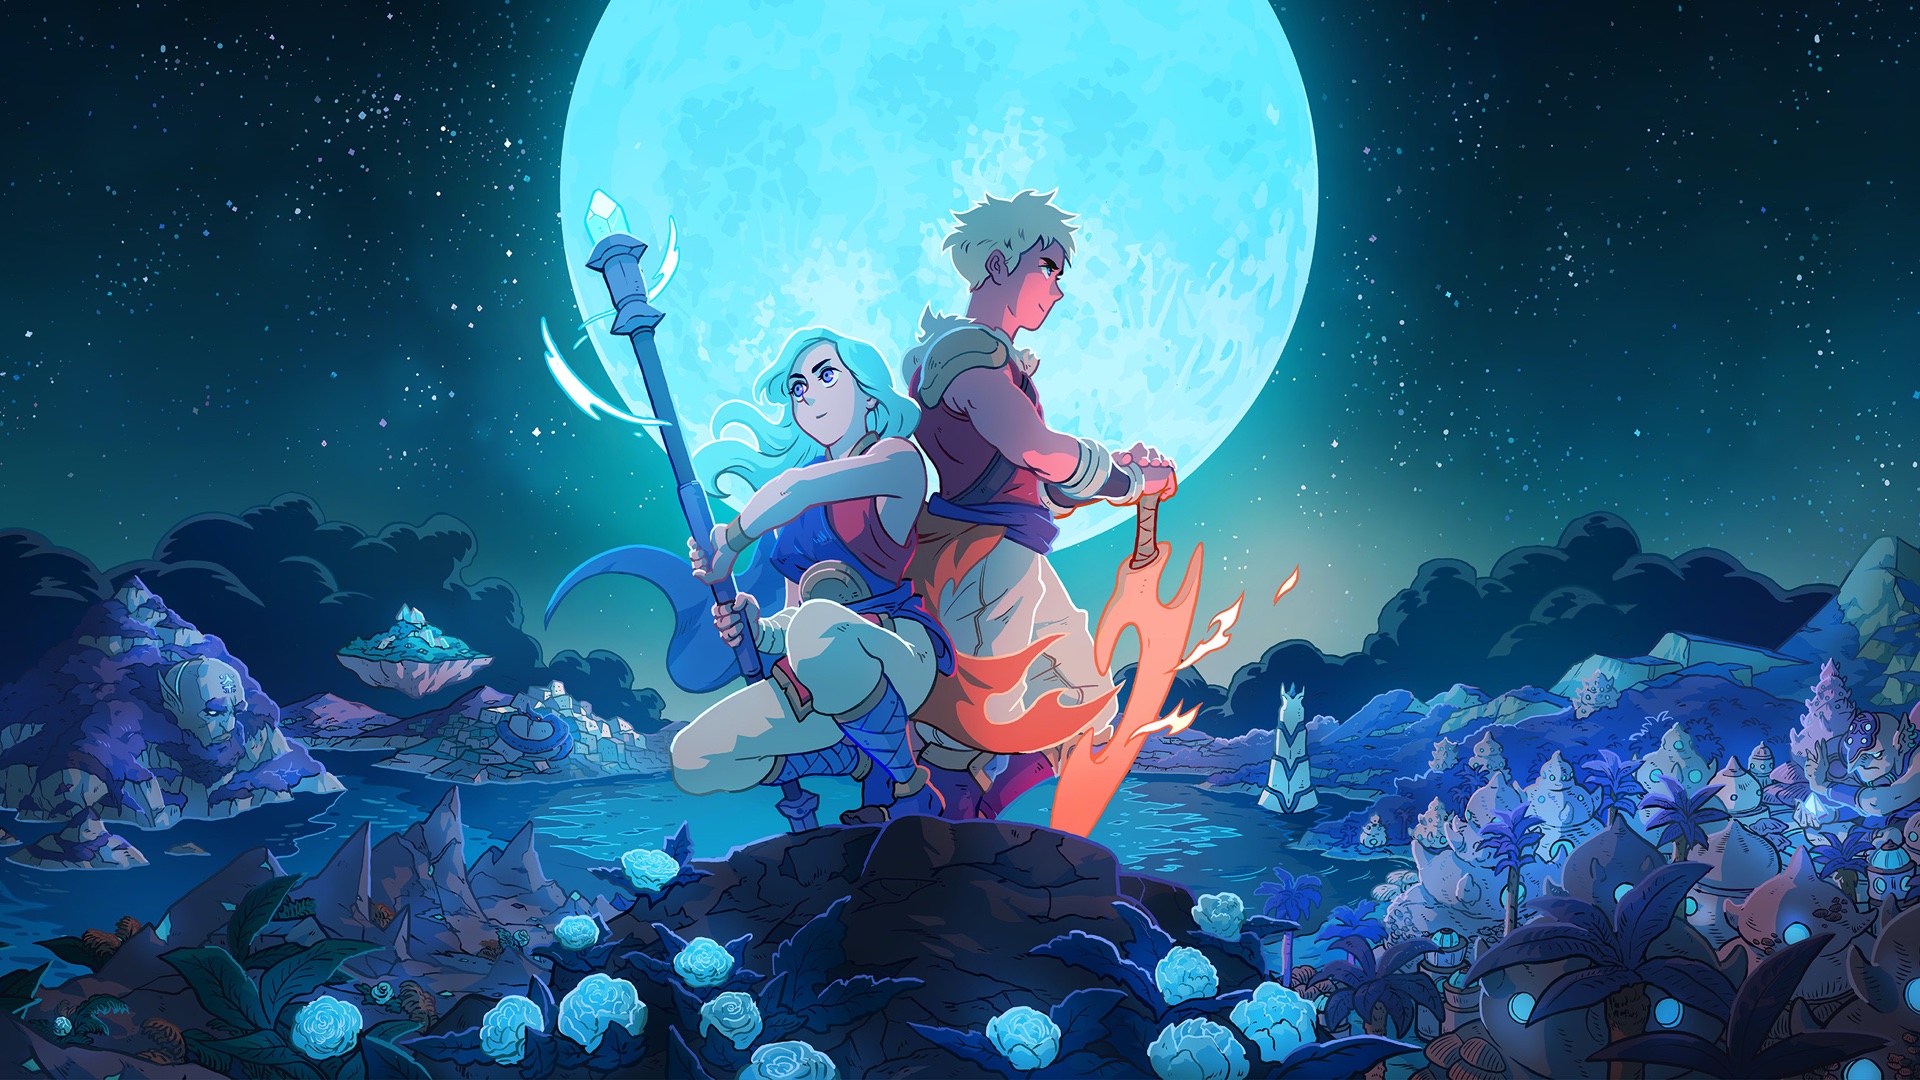 Two characters kneel in front of a moon in official Sea of Stars artwork